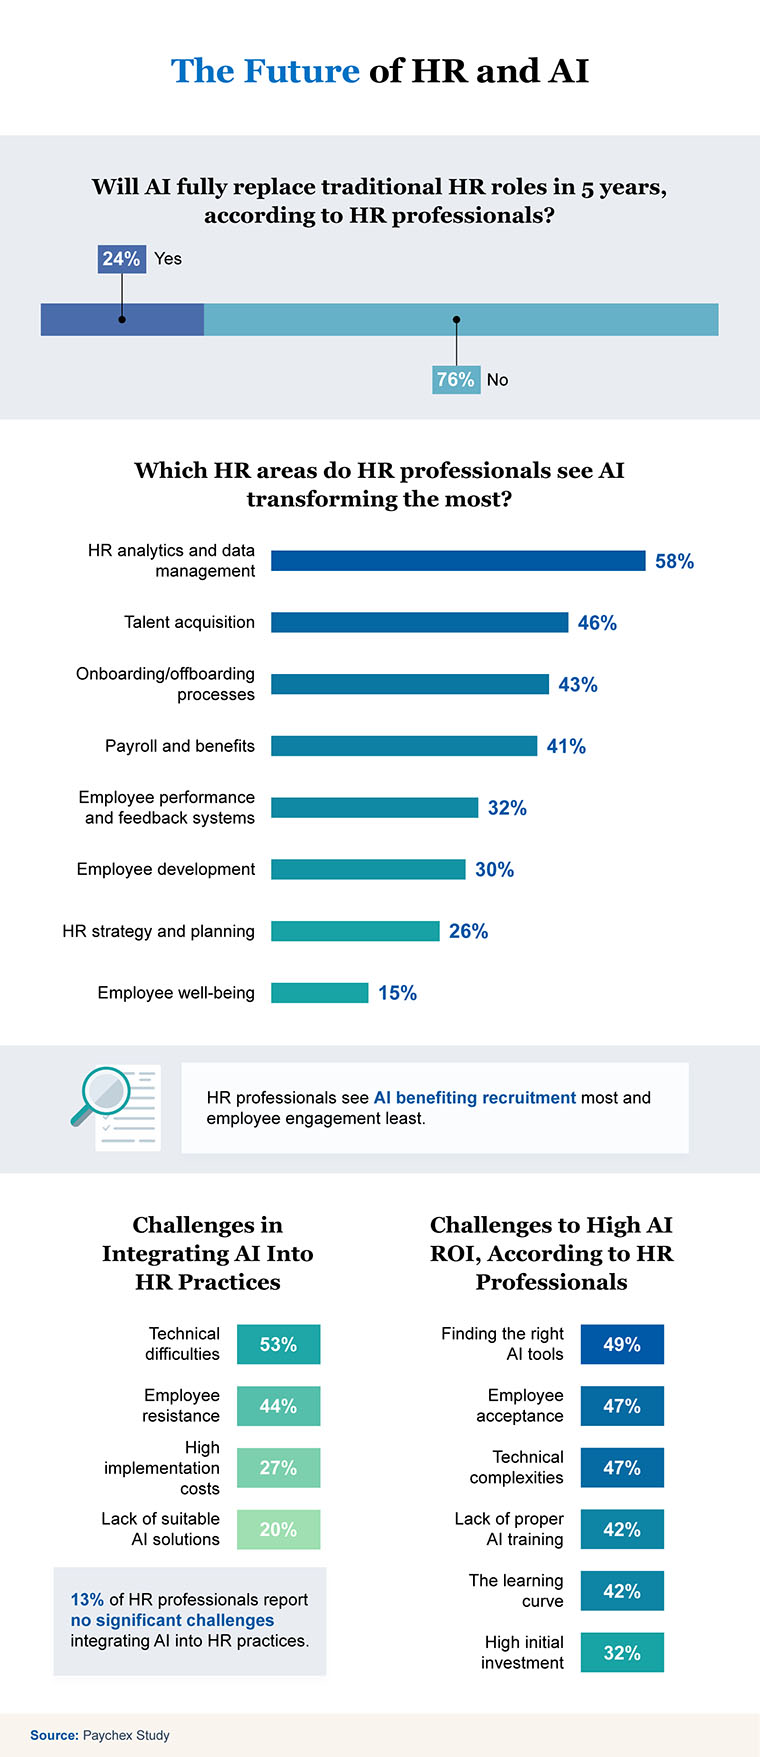 paychex study on the future of hr and ai